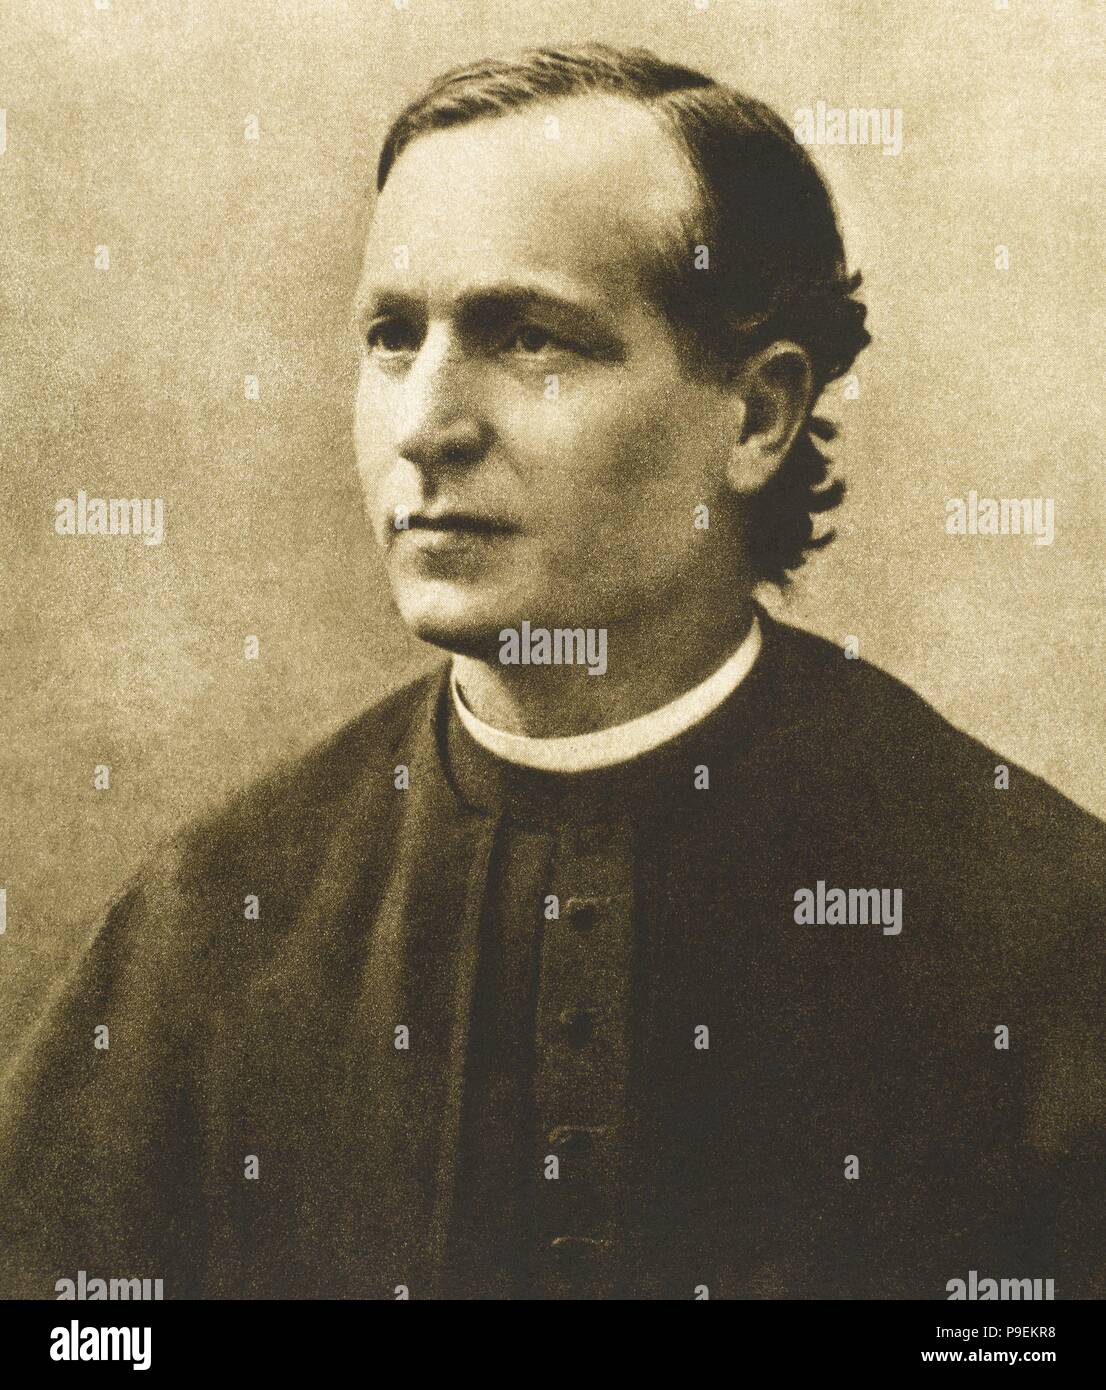 Andrej Hlinka (1864-1938). Slovak Catholic priest, journalist, banker and politician, one of the most important Slovak public activists in Czechoslovakia before Second World War. Portrait. Photography. Stock Photo